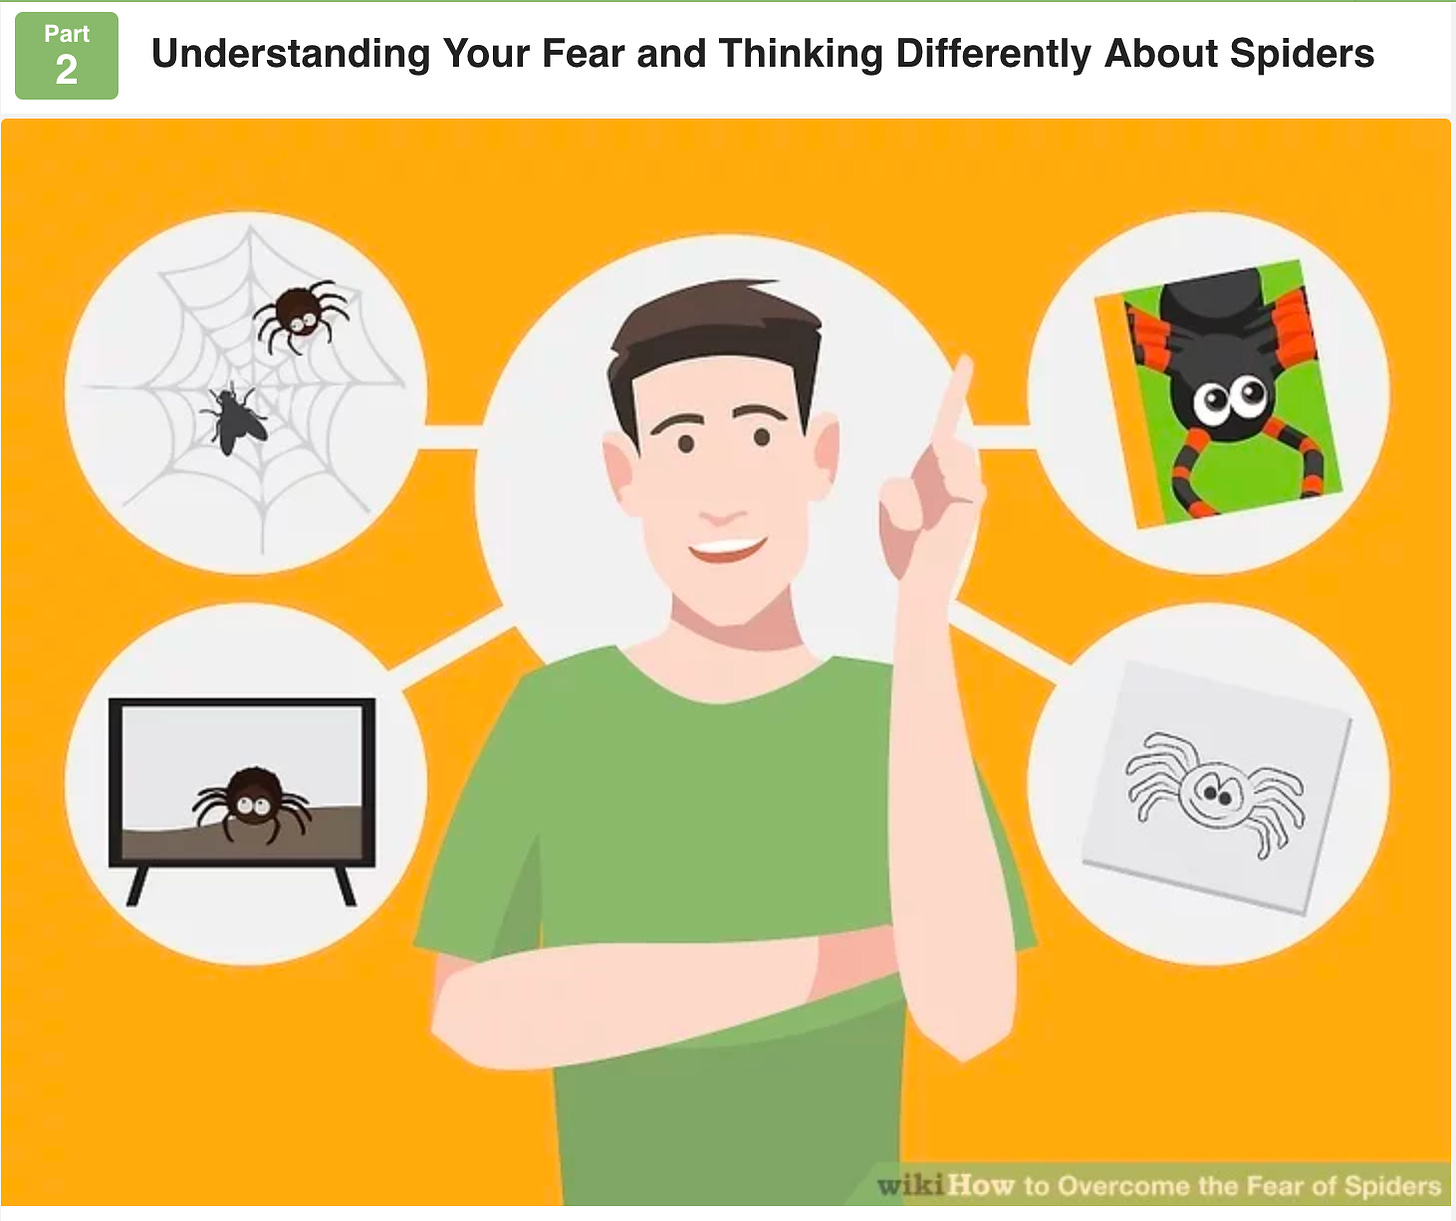 Illustration from Wikihow titled "Understanding your fear and thinking differently about spiders." A cartoon man imagines several different cute versions of spiders.